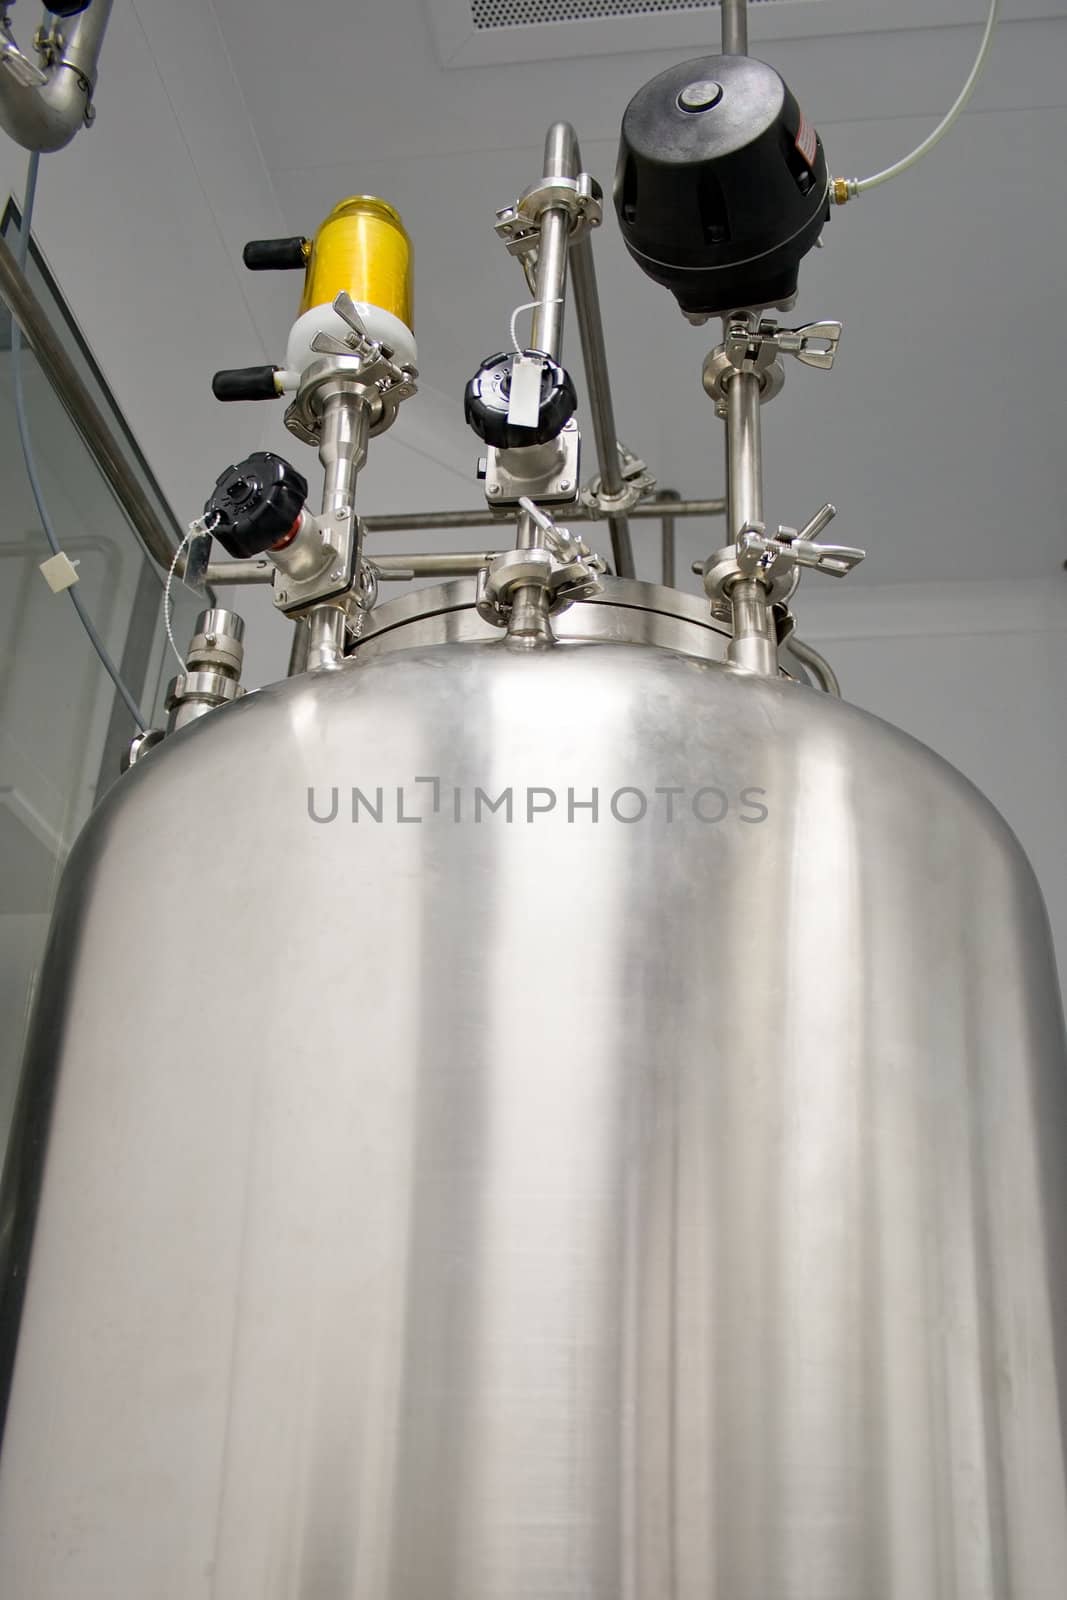 Tank in a clean room, production of medicines by Nickondr